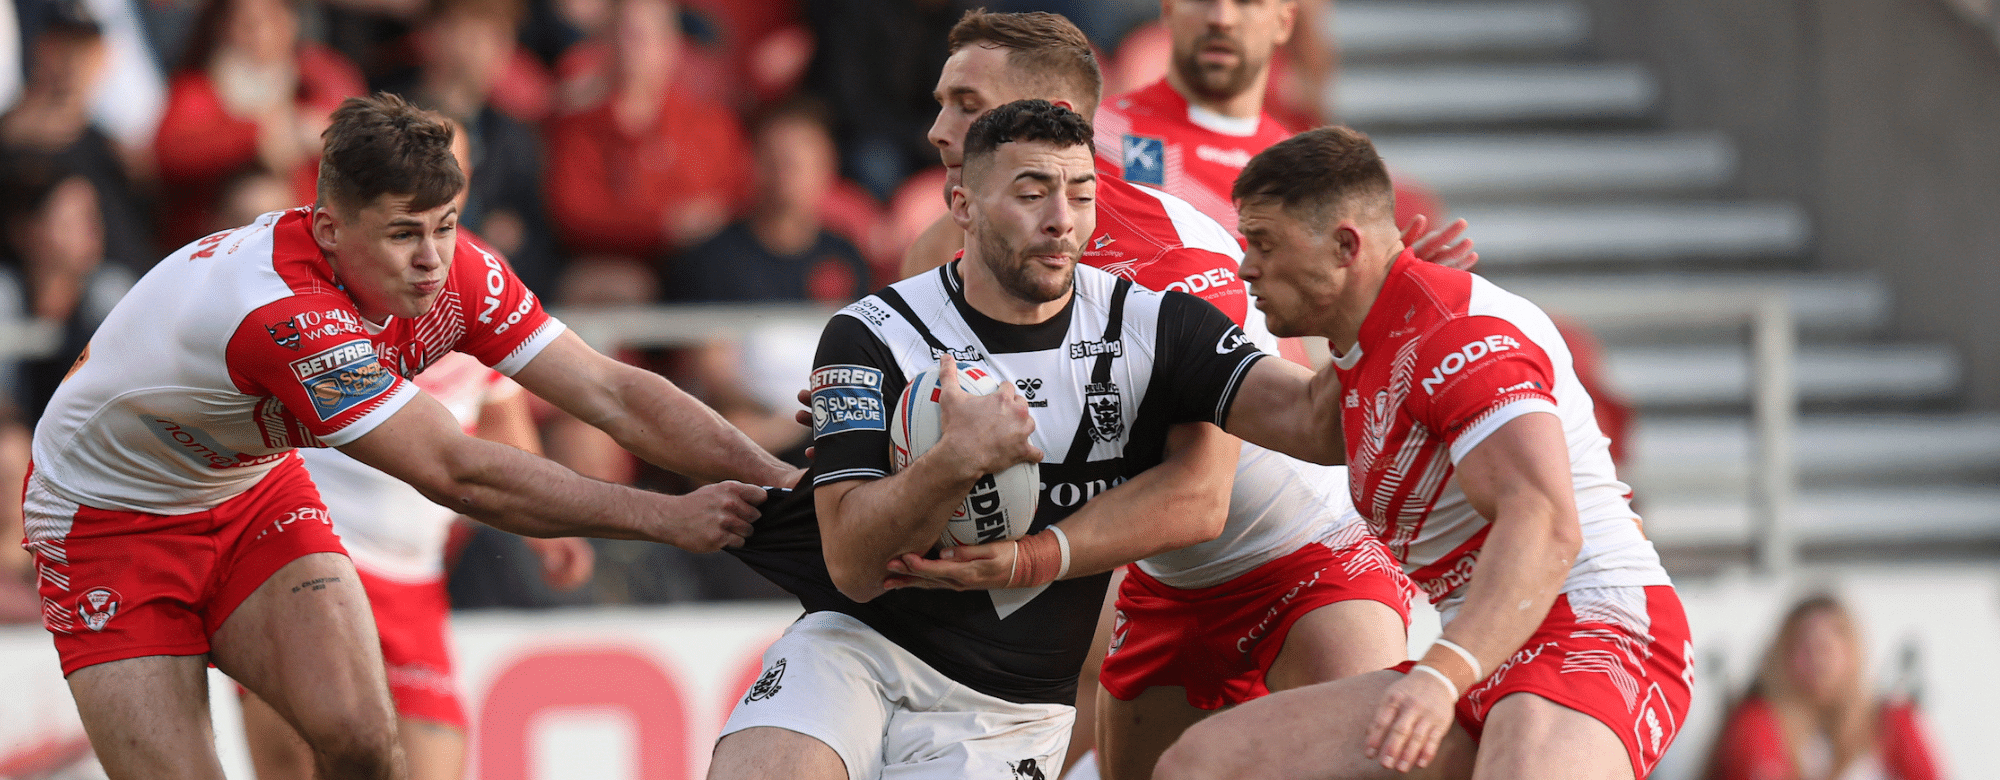 Match Report: St Helens 24-10 Hull FC